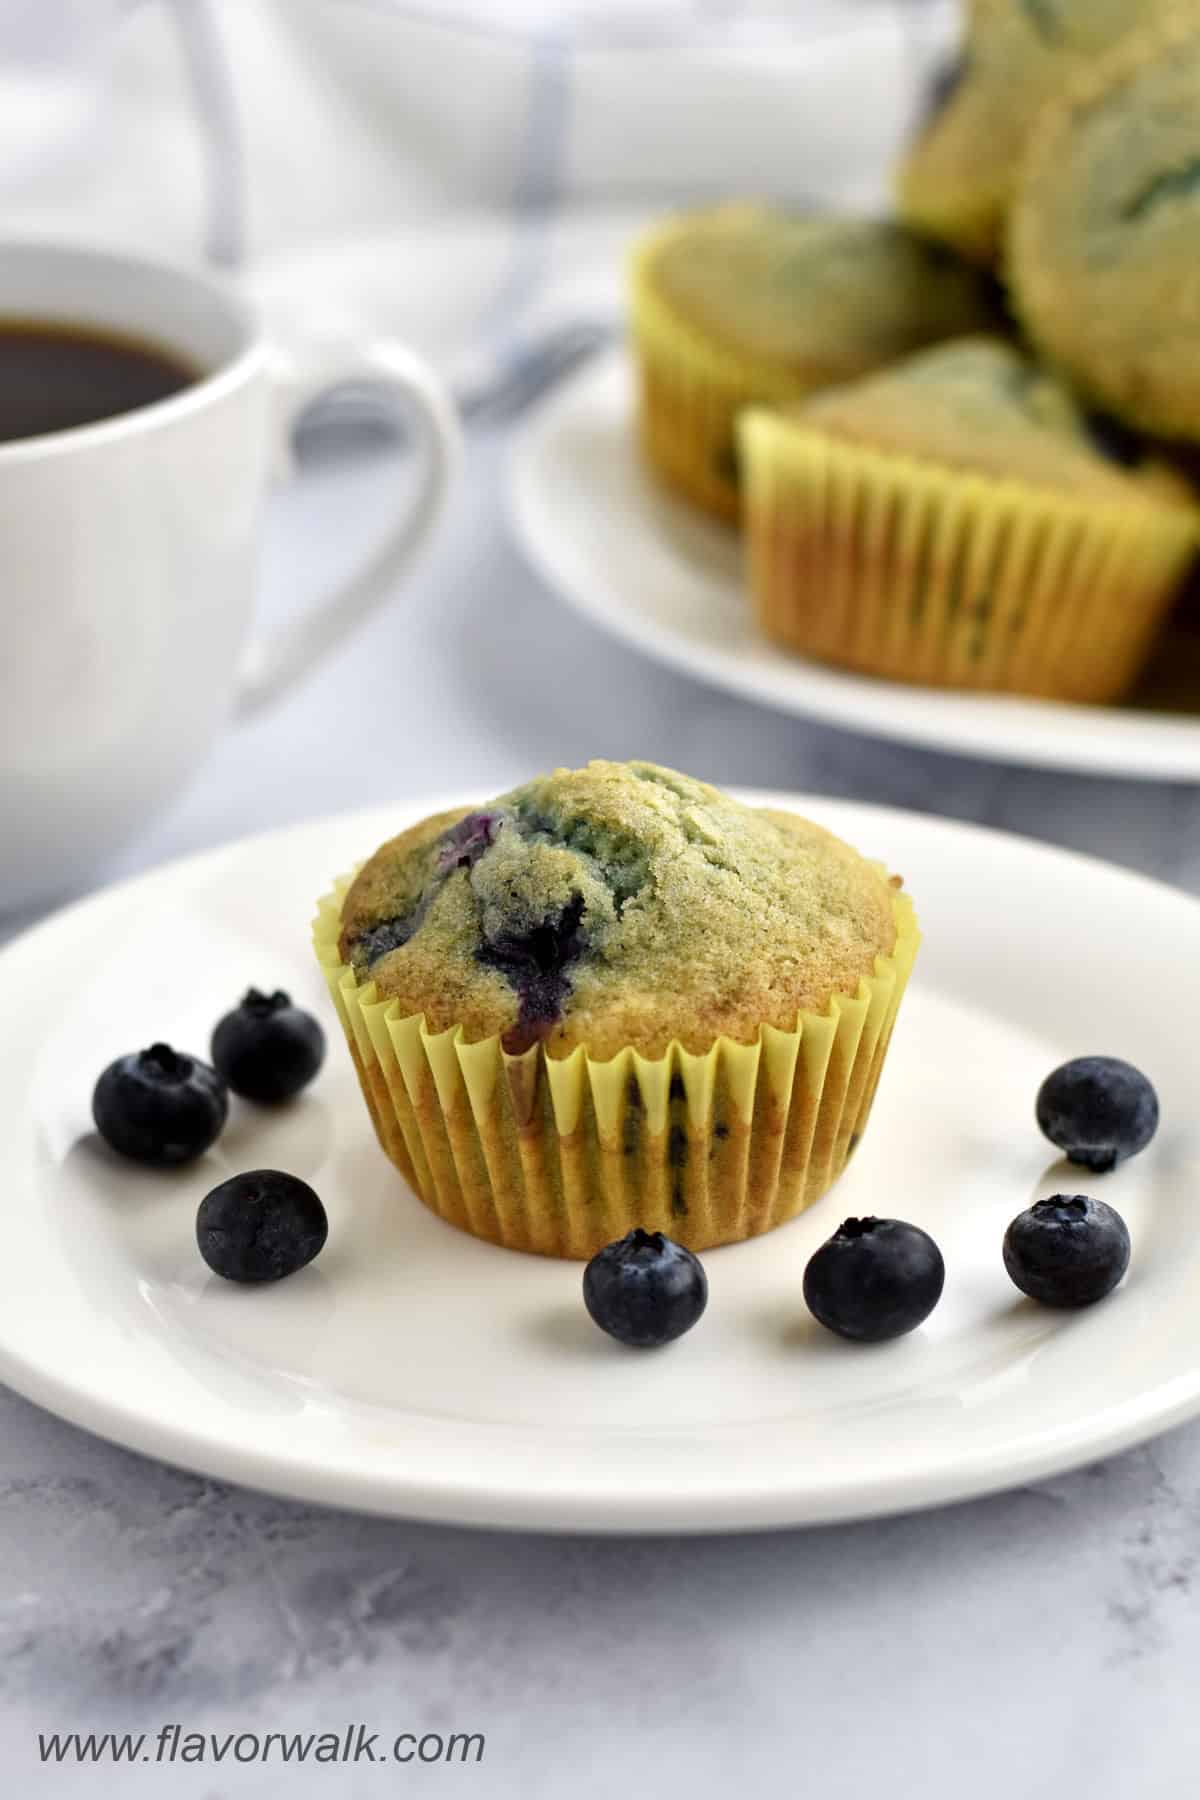 One gluten free blueberry muffin and a few blueberries on a small white plate with a cup of coffee and more muffins in the background.